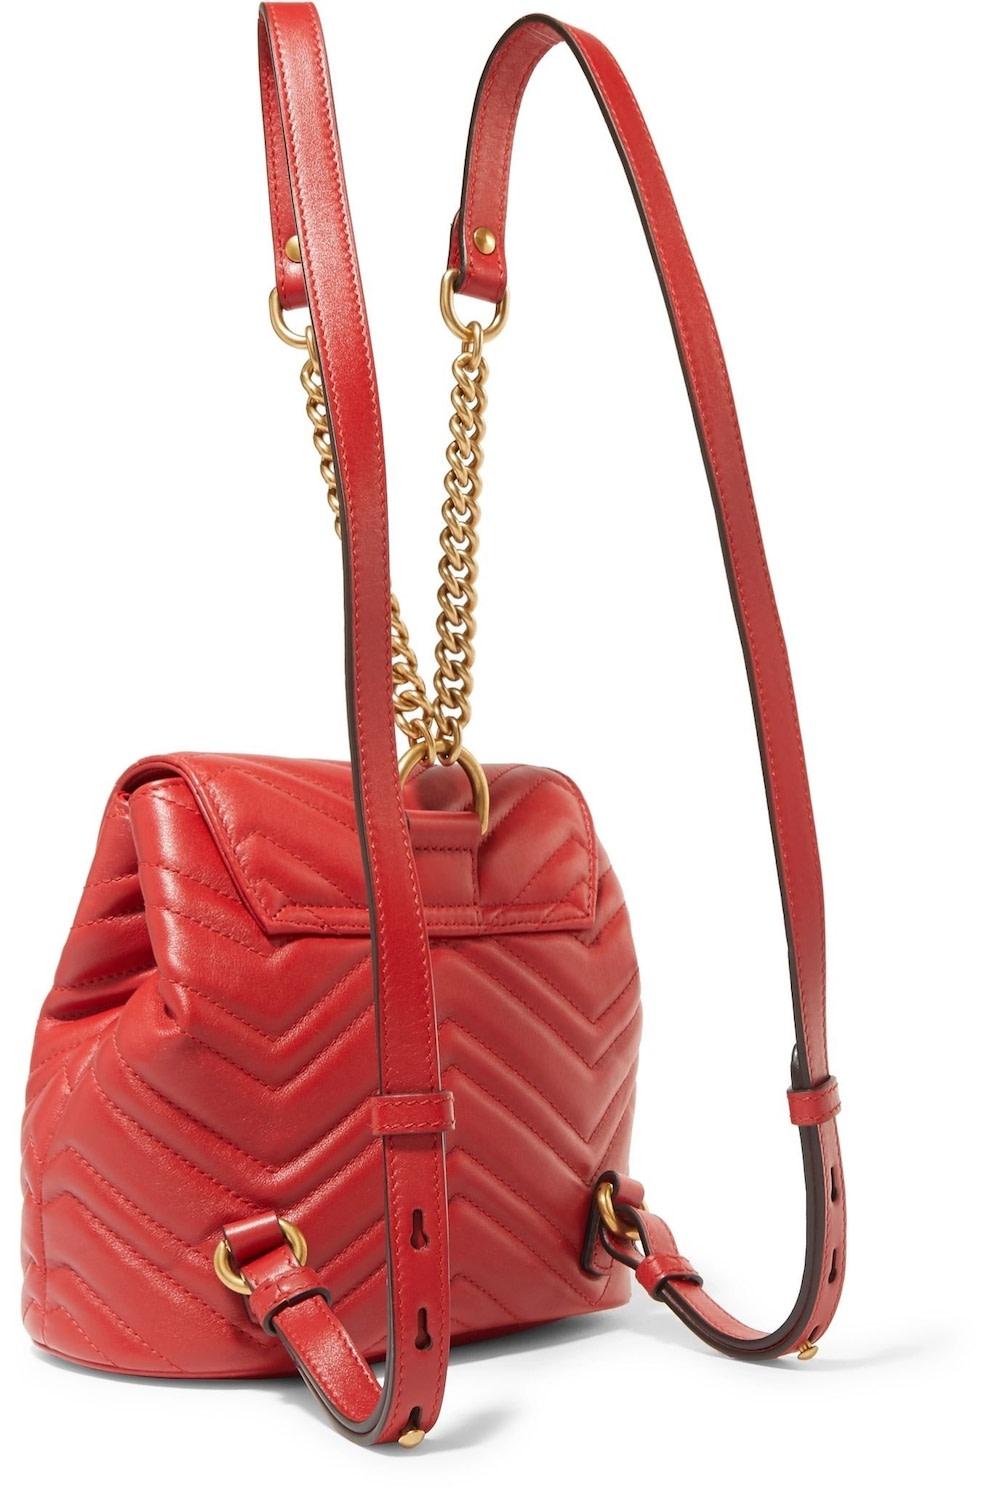  Gucci Marmont Matelasse Leather Mini Backpack - Red 2